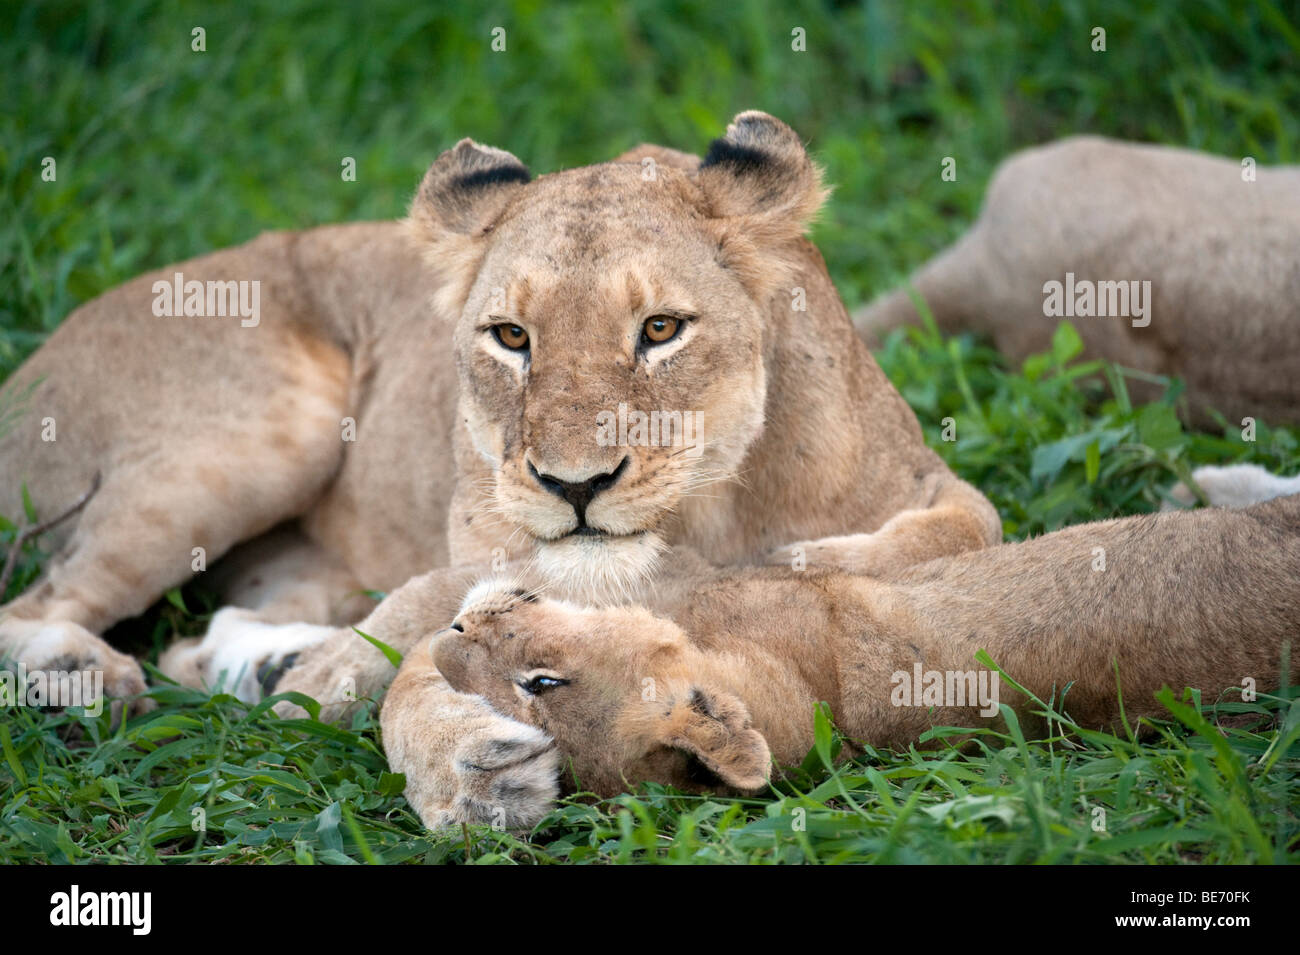 Lion giocando con cub (Panthero leo), Kruger National Park, Sud Africa Foto Stock